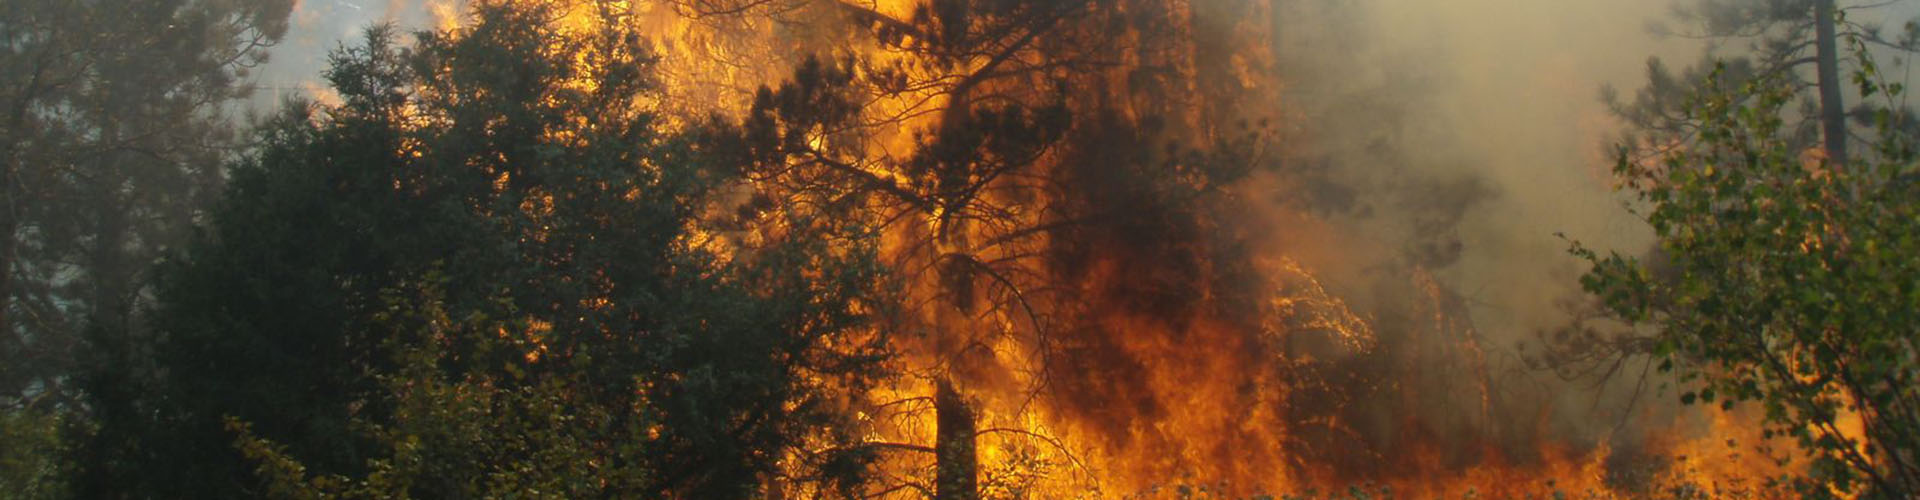 Wildfire burning through a stand of trees